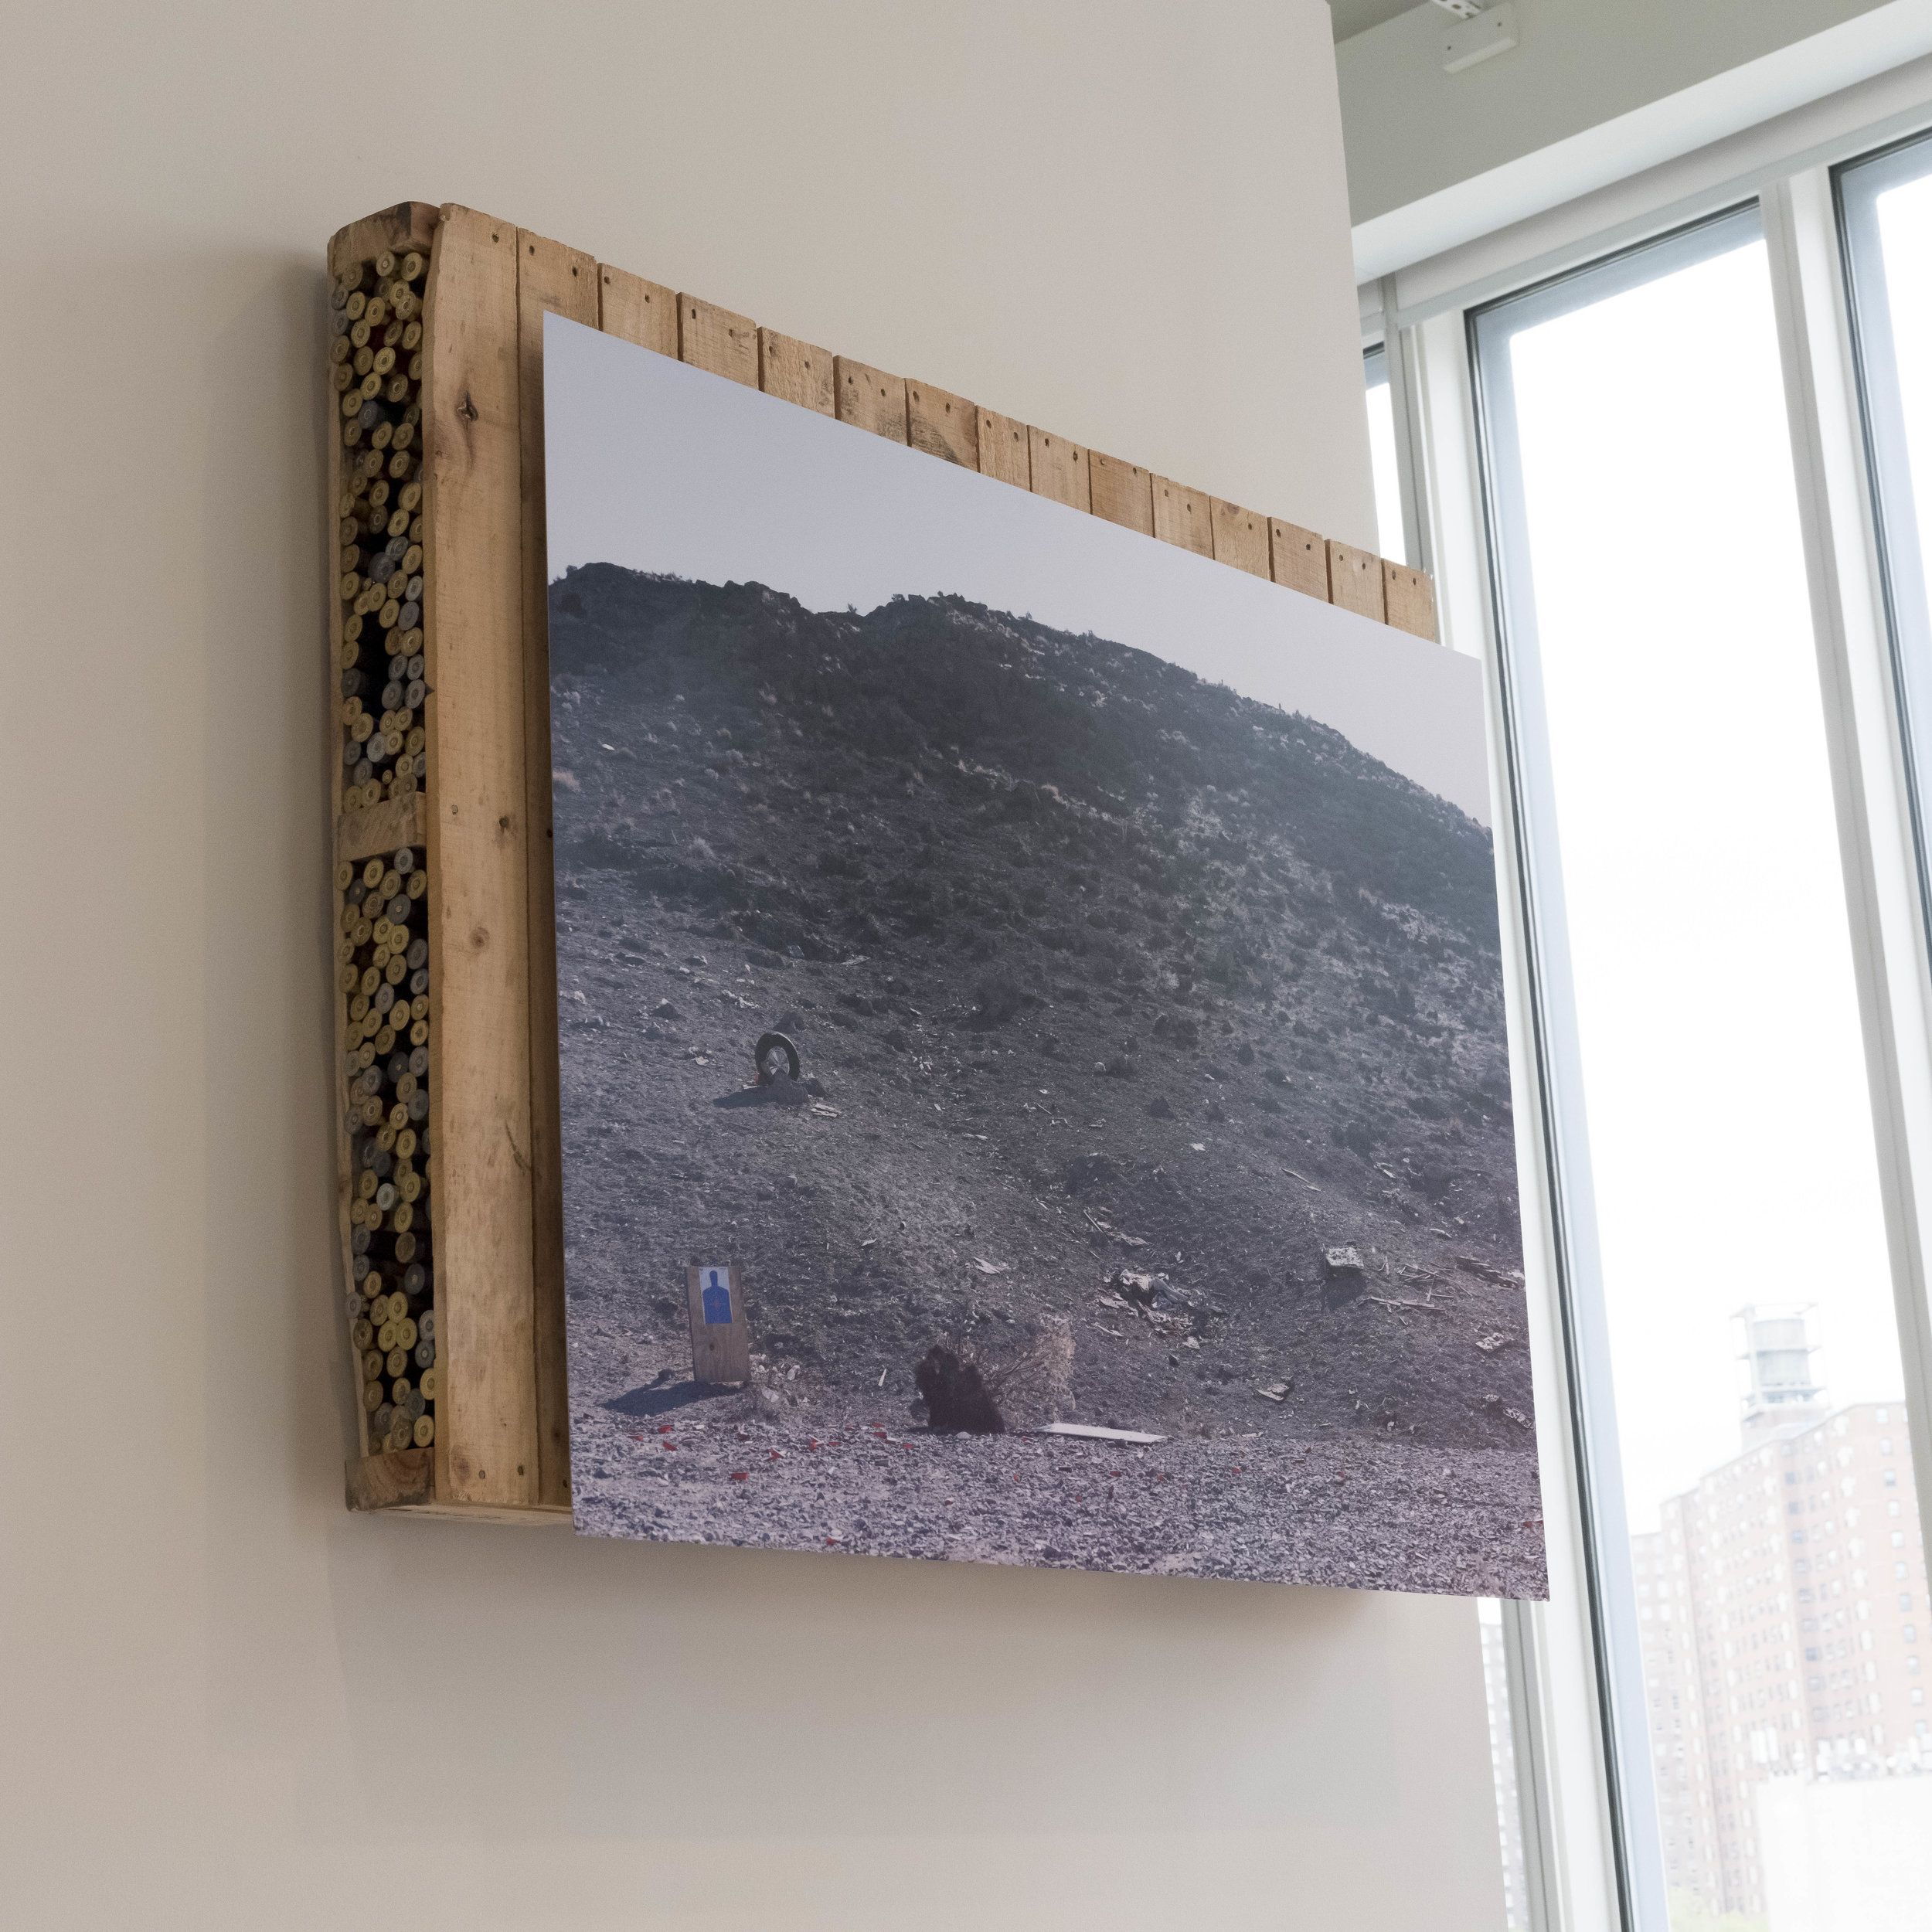  Shooting Range #2, 36”x48”, Dye Sub Aluminum Print mounted on pallet with found shotgun shells from HDSP area, 2019 